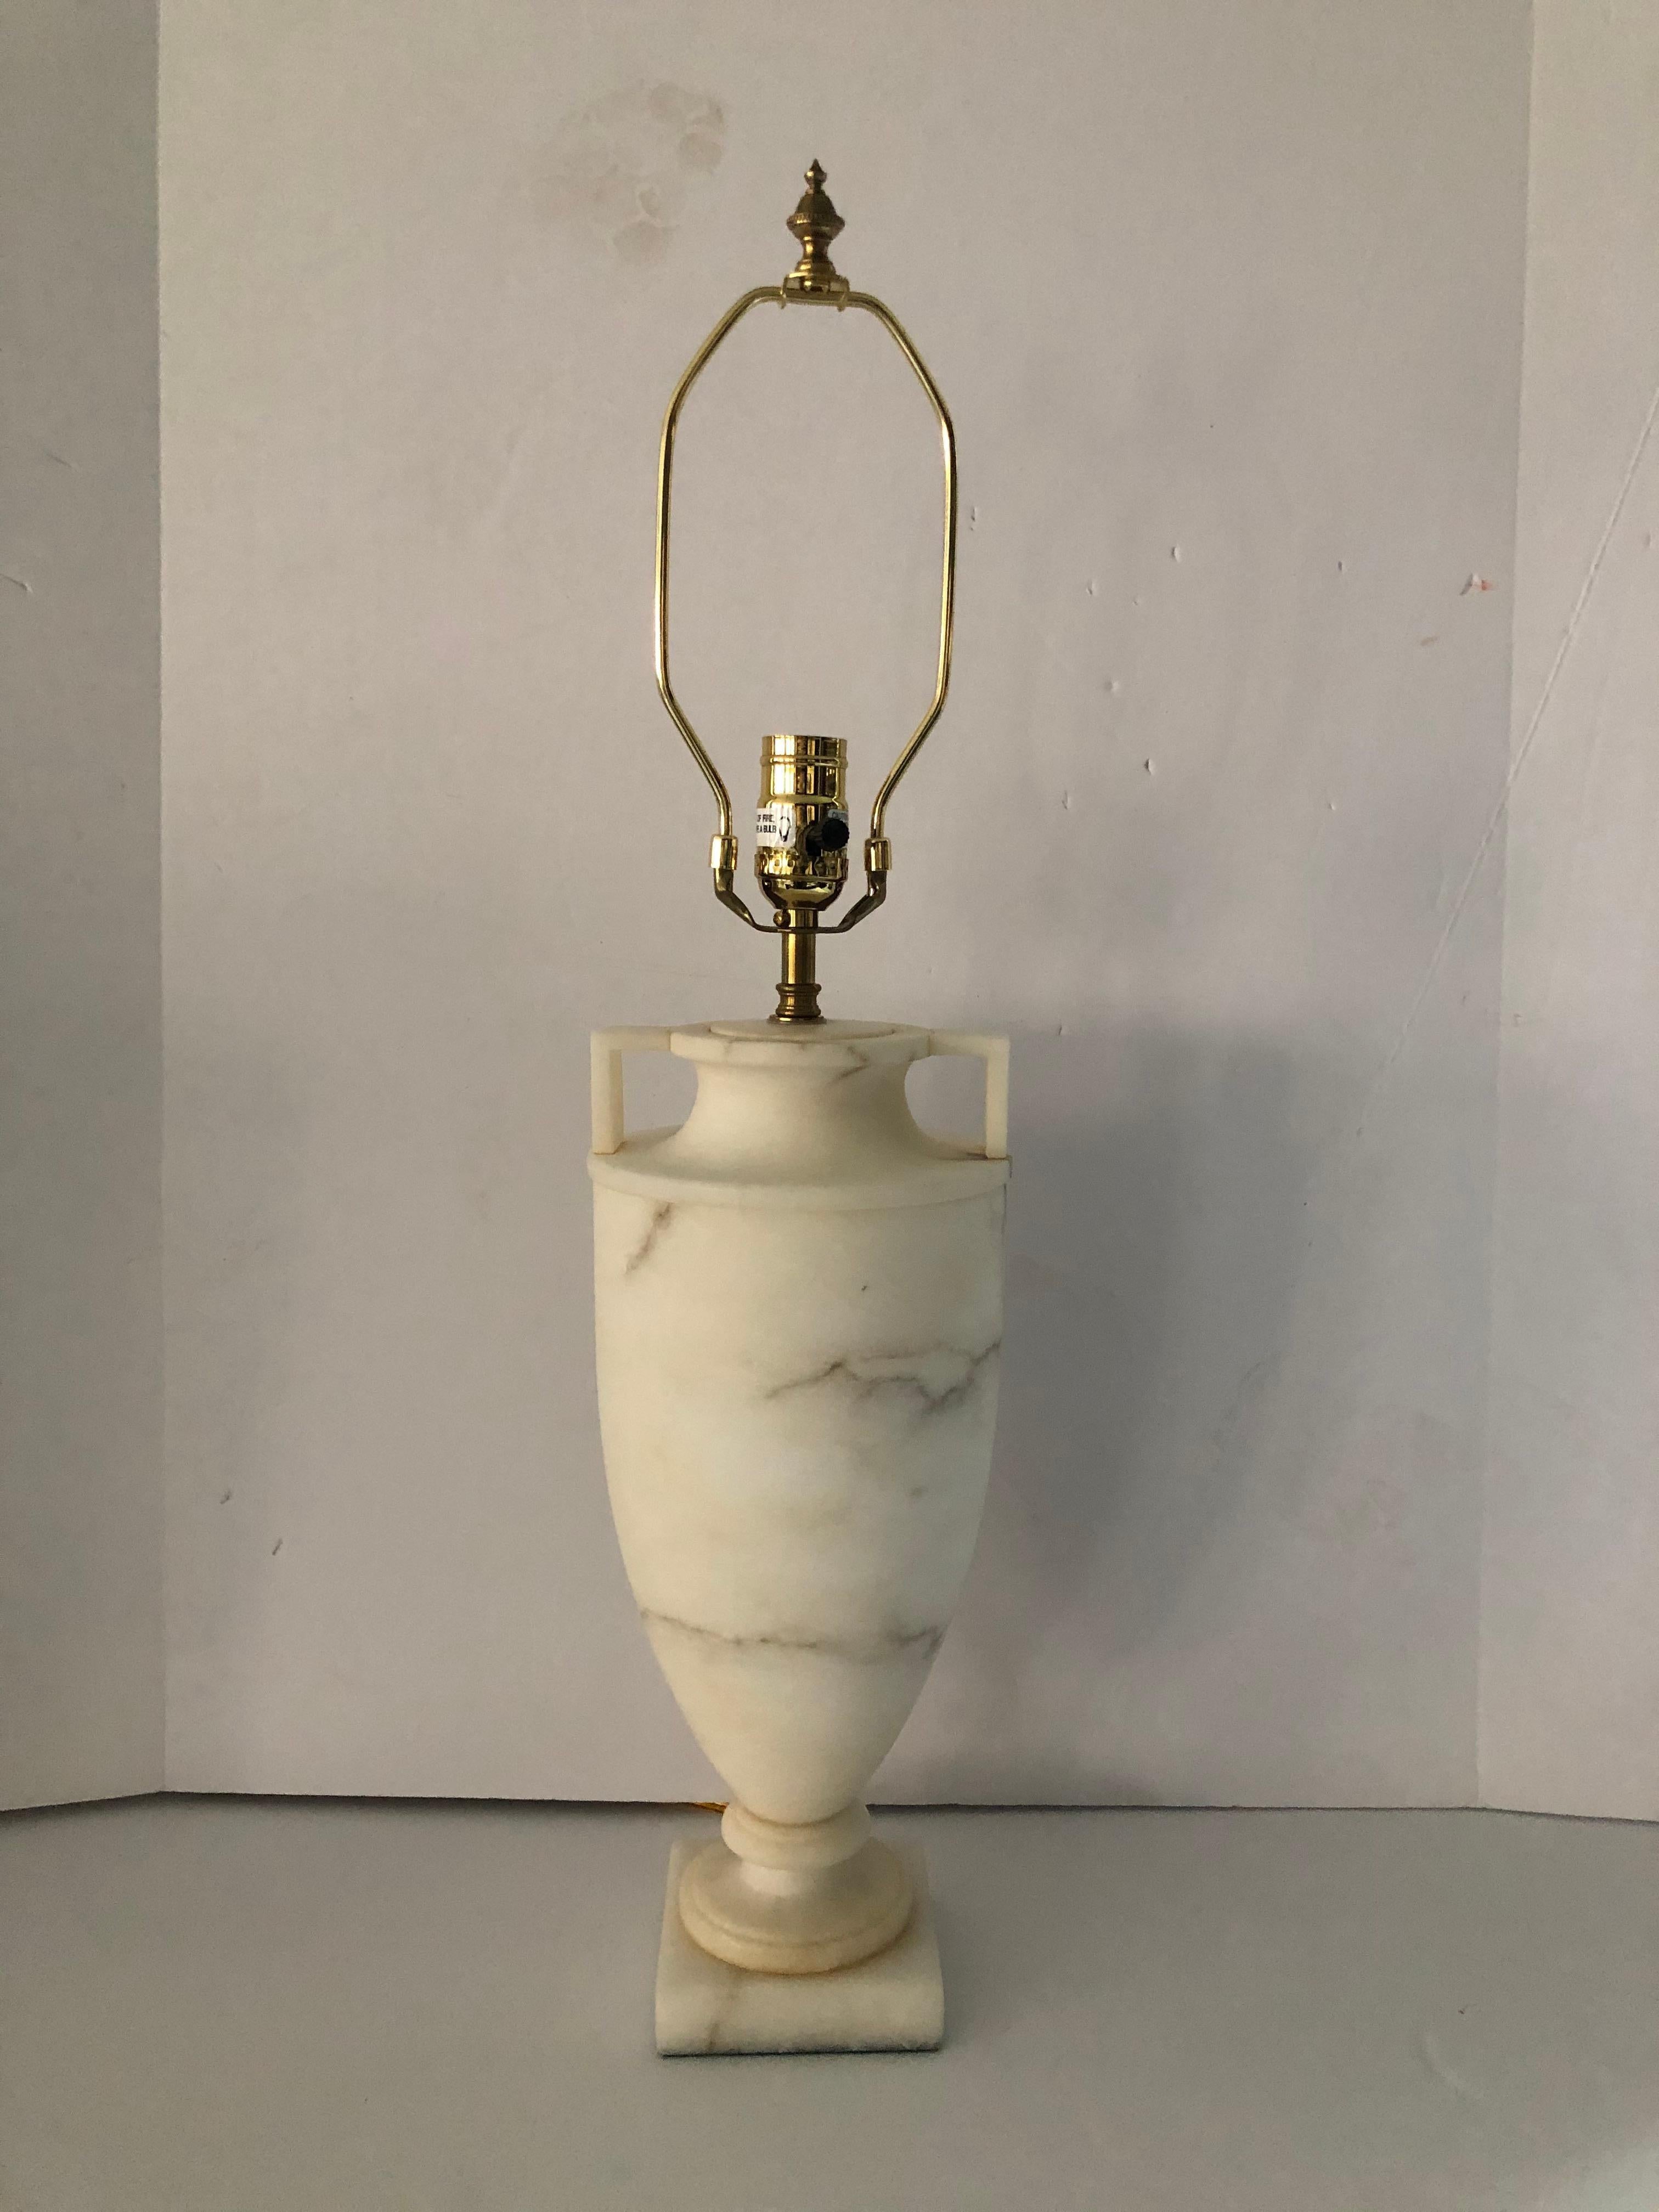 A sophisticated urn form lamp by Vaughn comprised of solid alabaster with a square base and squared handles. The veining in the alabaster is very subtle, adding to the beauty of the lamp. The shade is in black matte and lined in gold paper. The